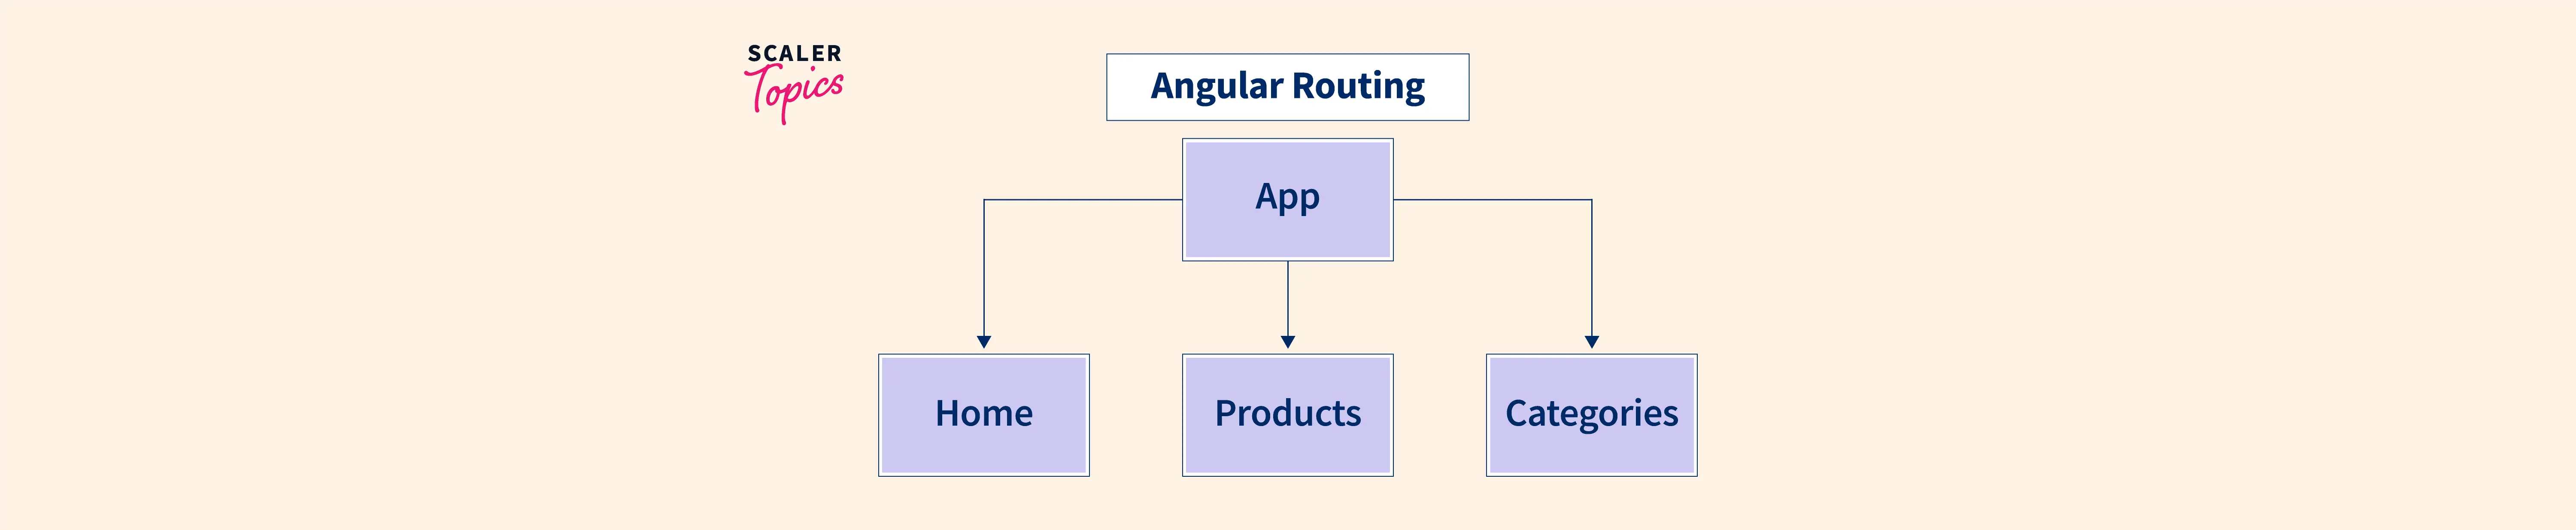 Routing In Angular Angular Routing Scaler Topics